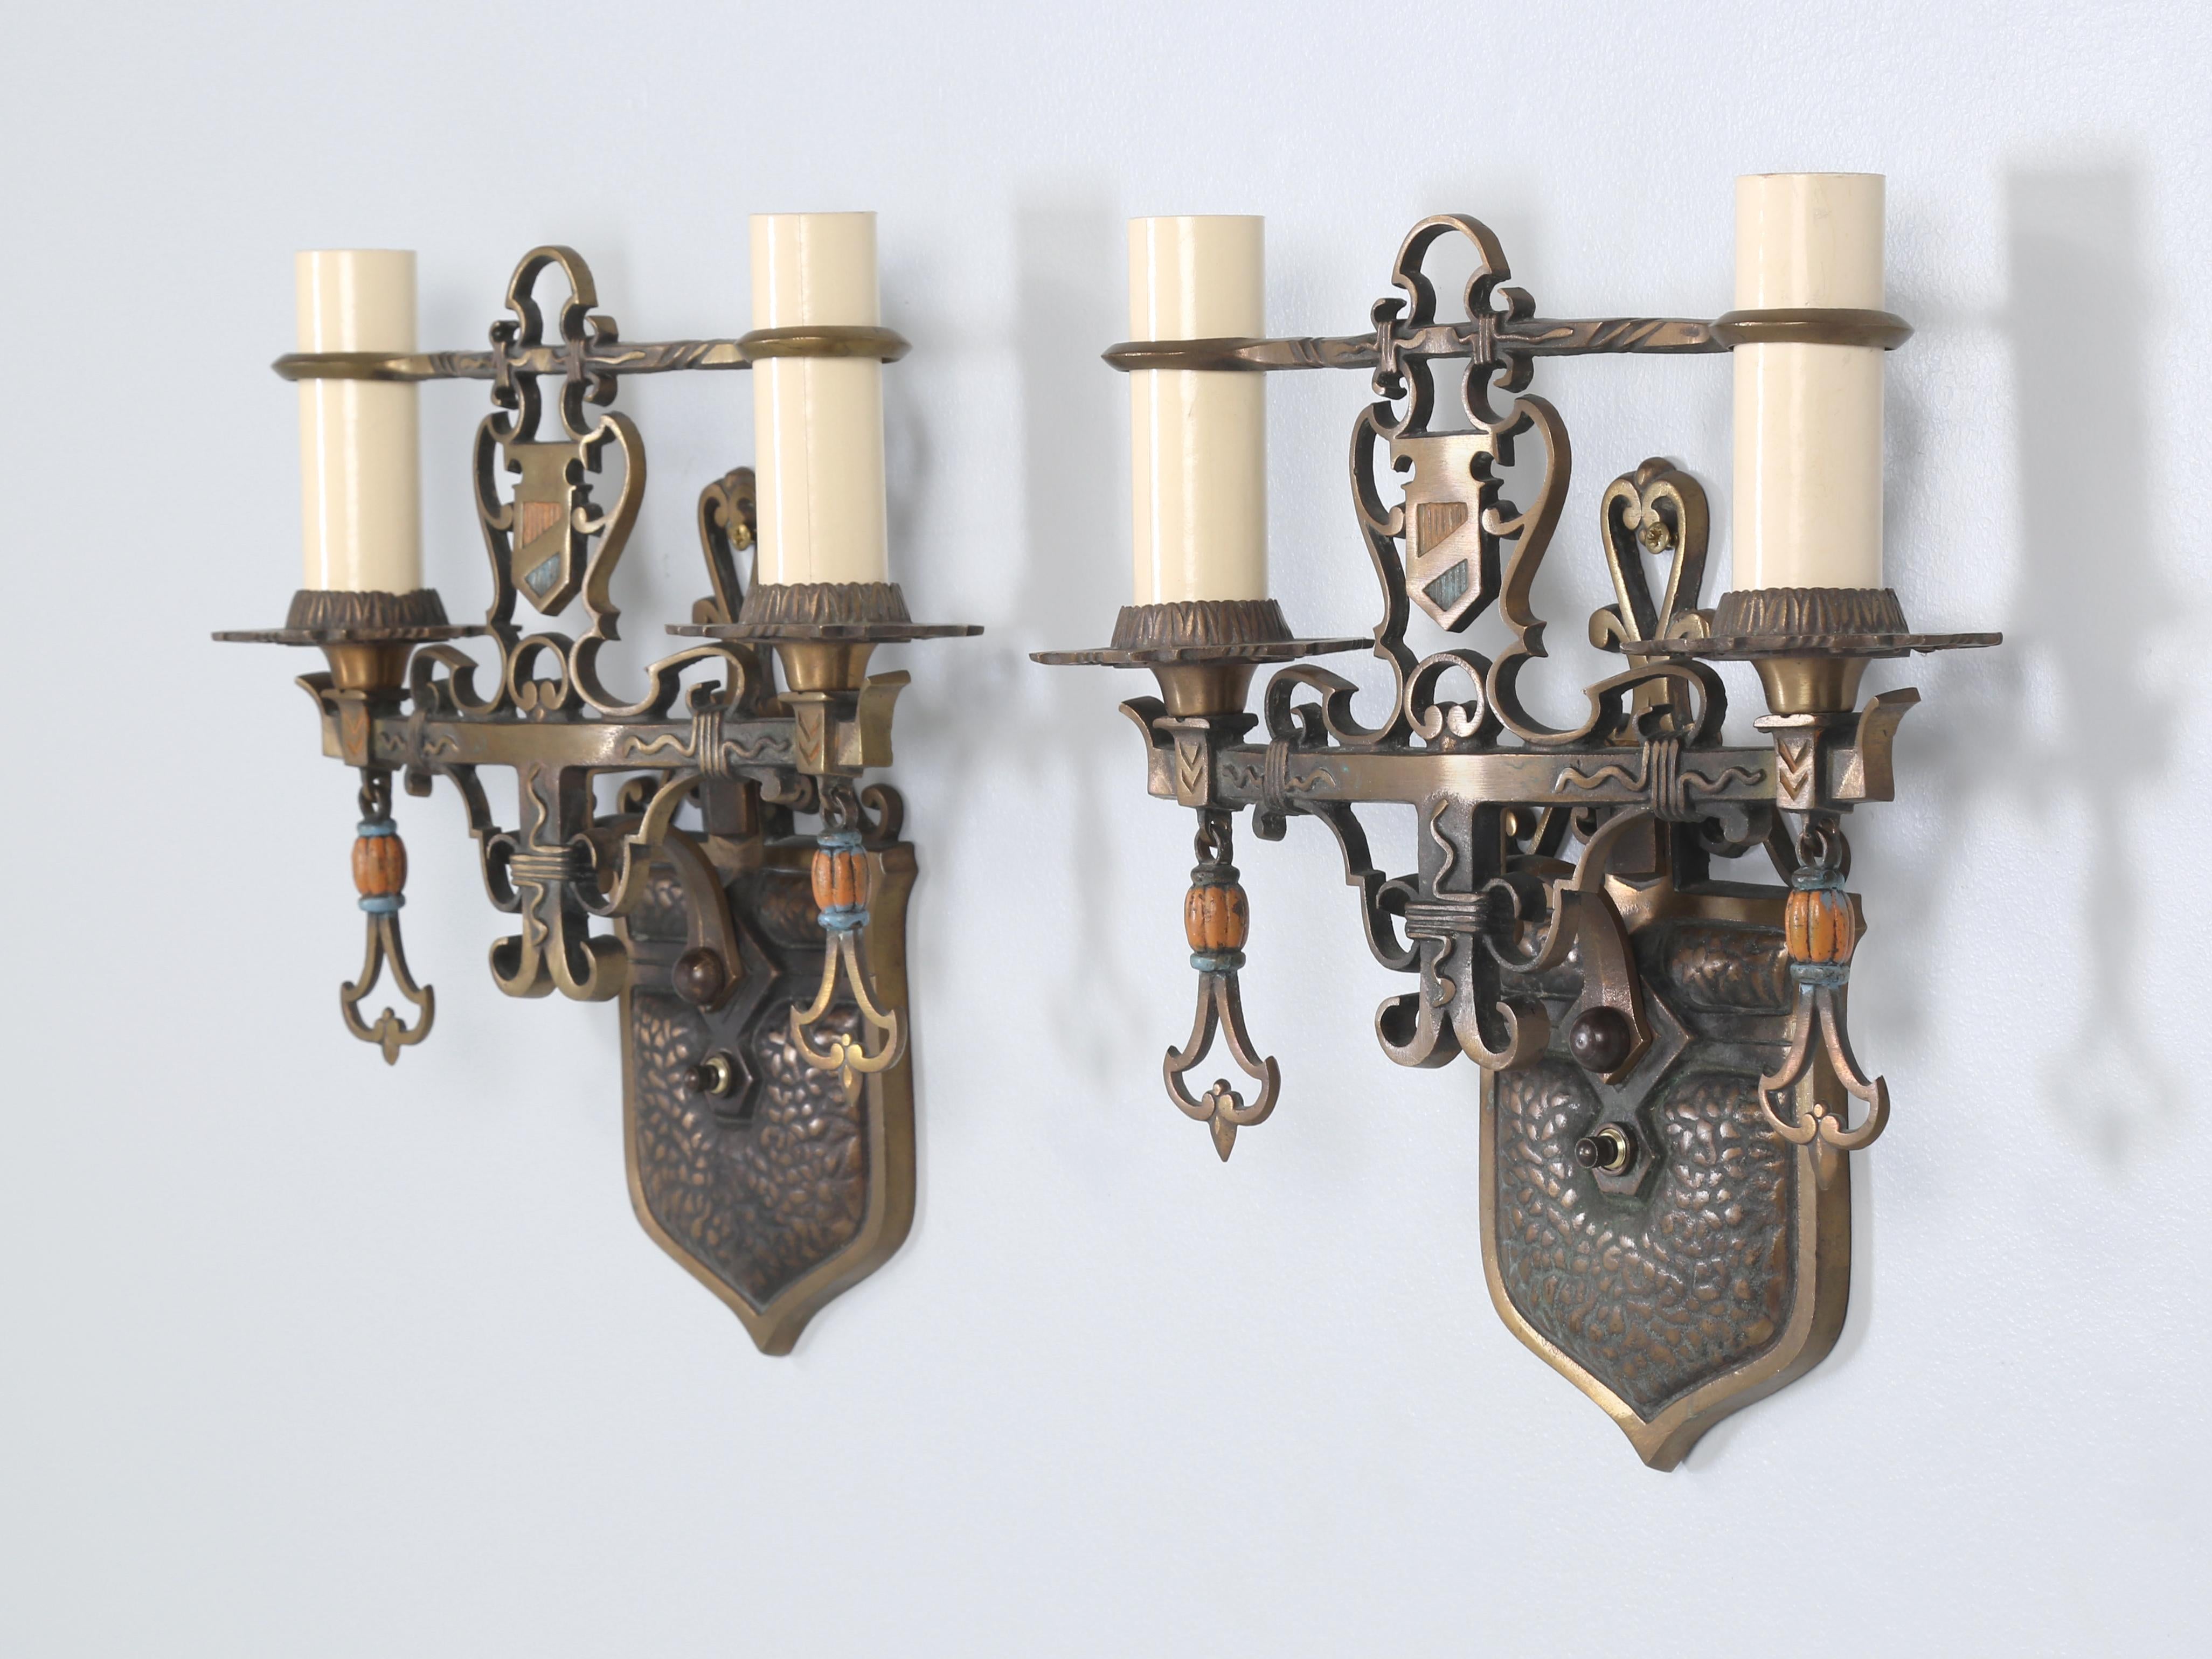 Our pair of hand-made solid brass sconces were removed from The John Rogerson Montgomery House, which was a residence designed by architect Howard Van Doren Shaw in Glencoe, Illinois. It is considered to be a significant example of Georgian Revival